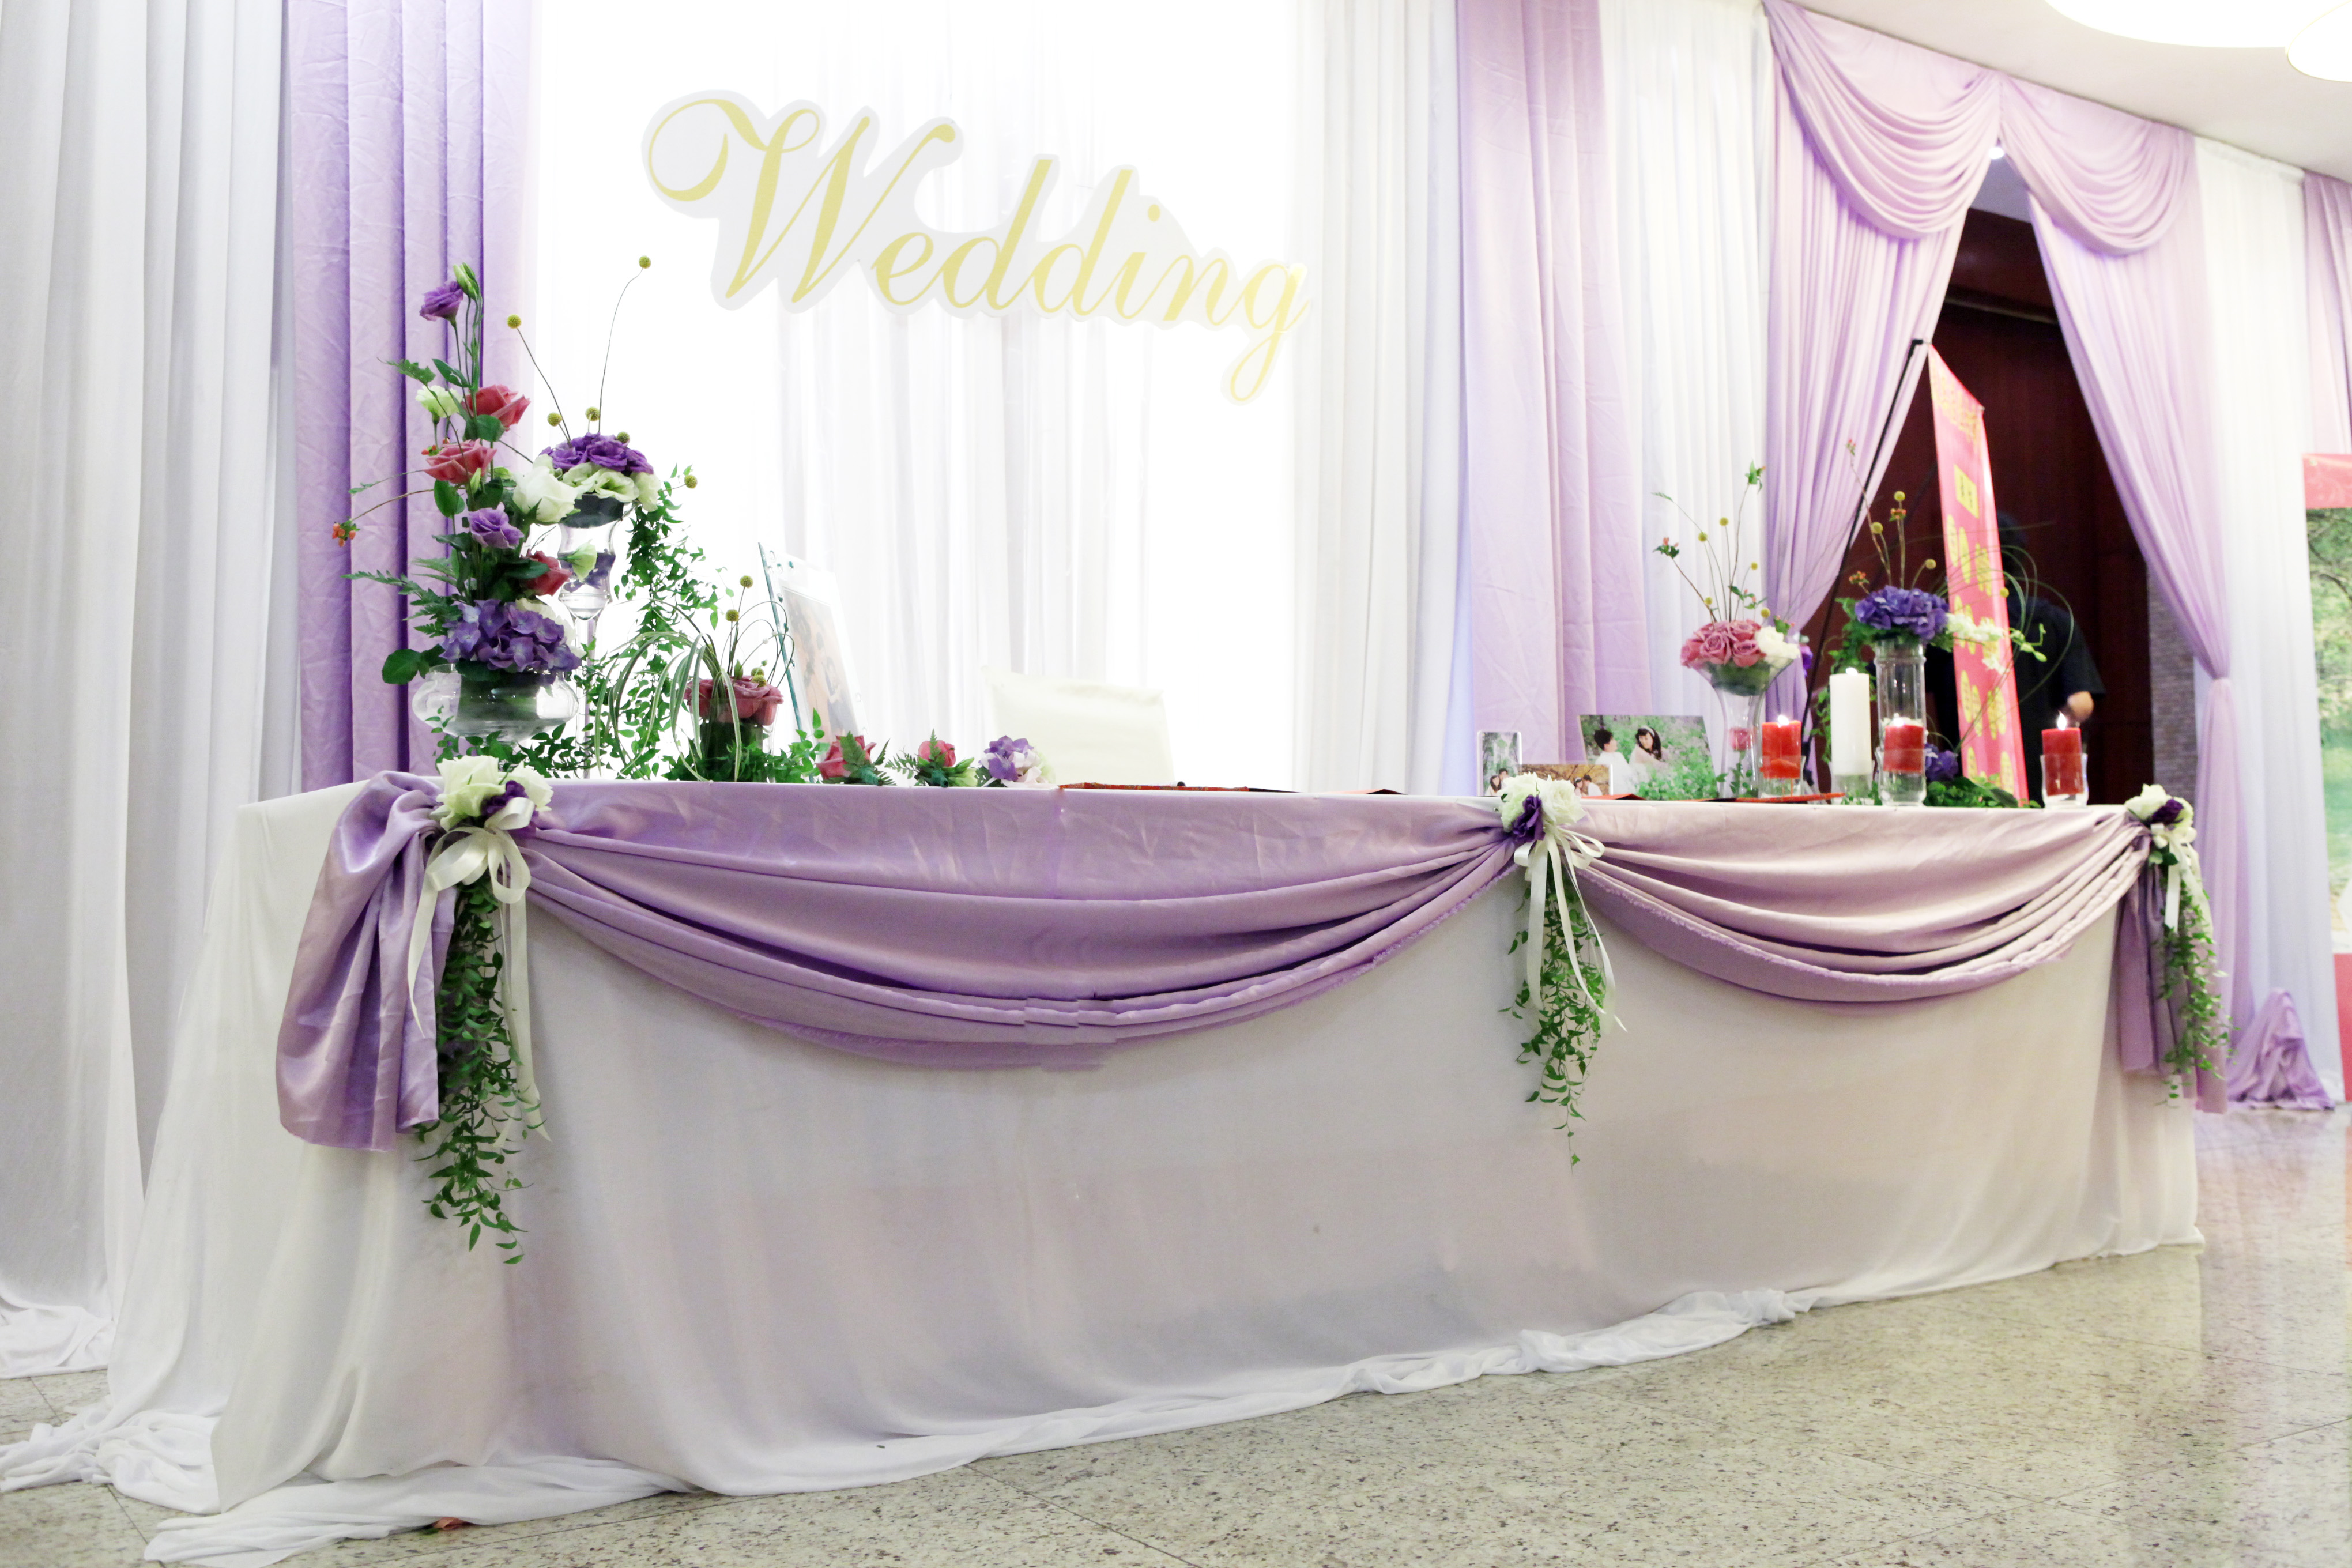 Pipe and drape of wedding backdrop